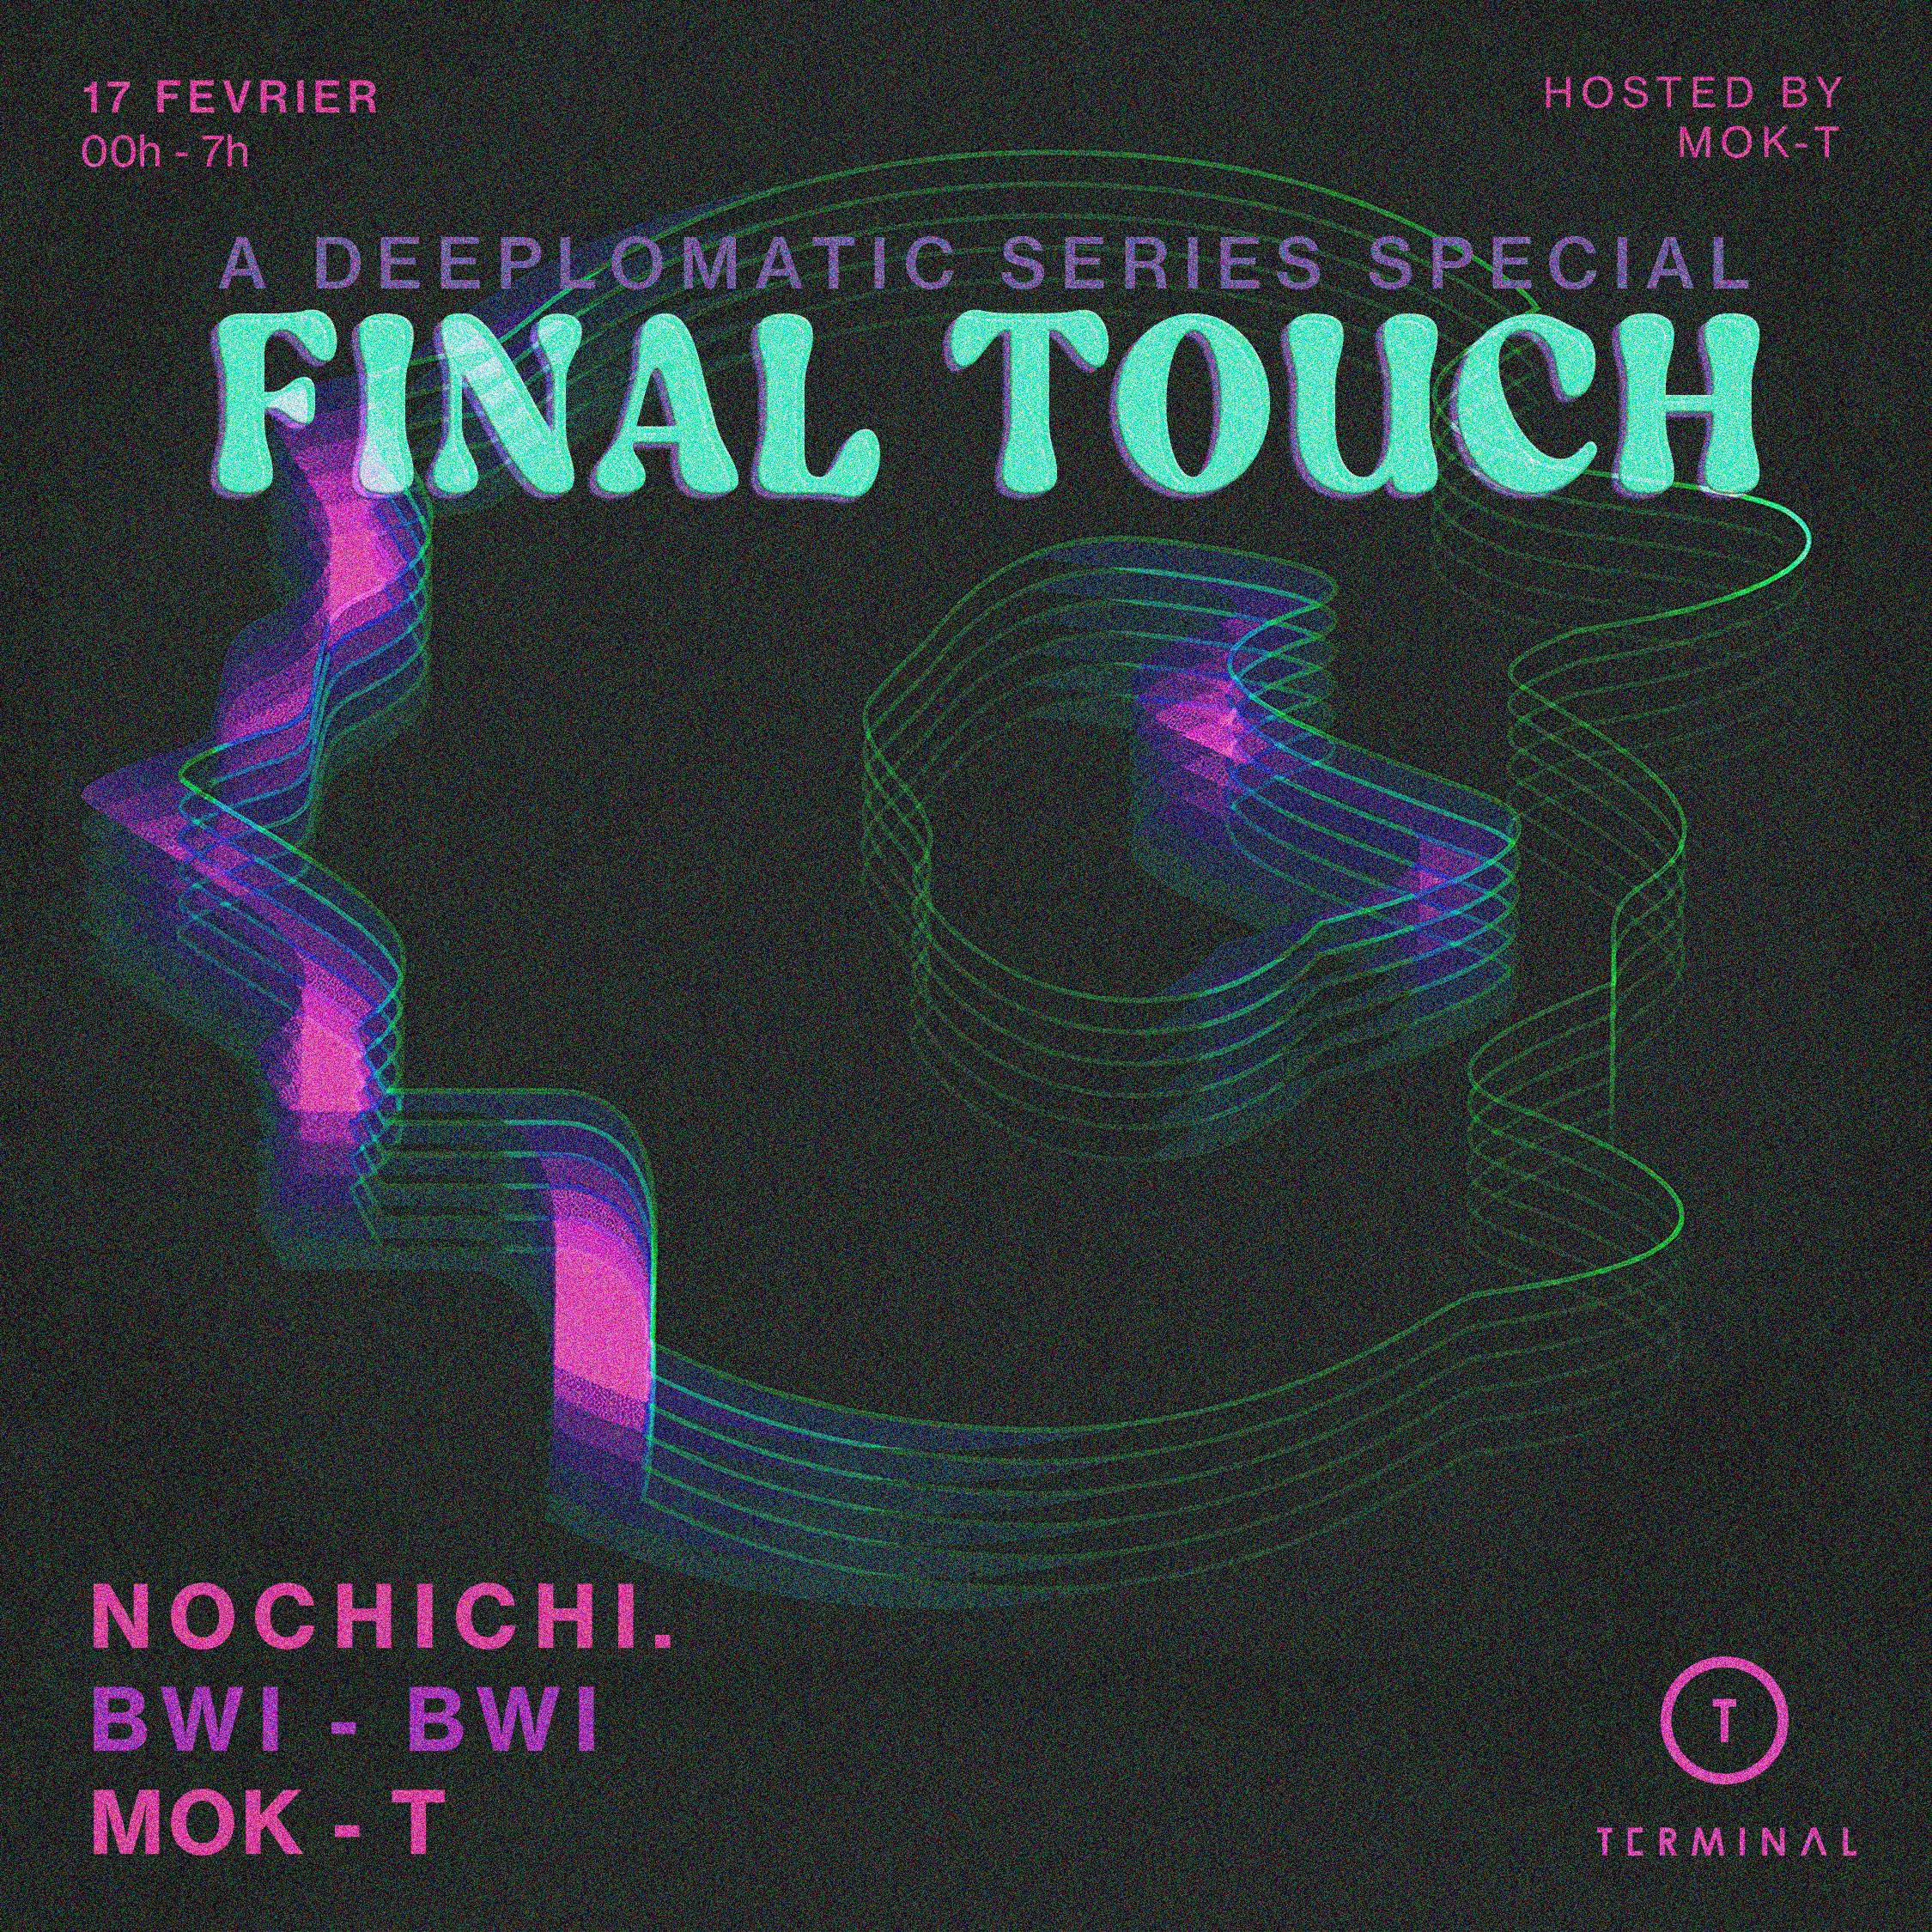 FINAL TOUCH (A Deeplomatic Series Special) with nochichi., Bwi-Bwi, Mok-T - フライヤー表